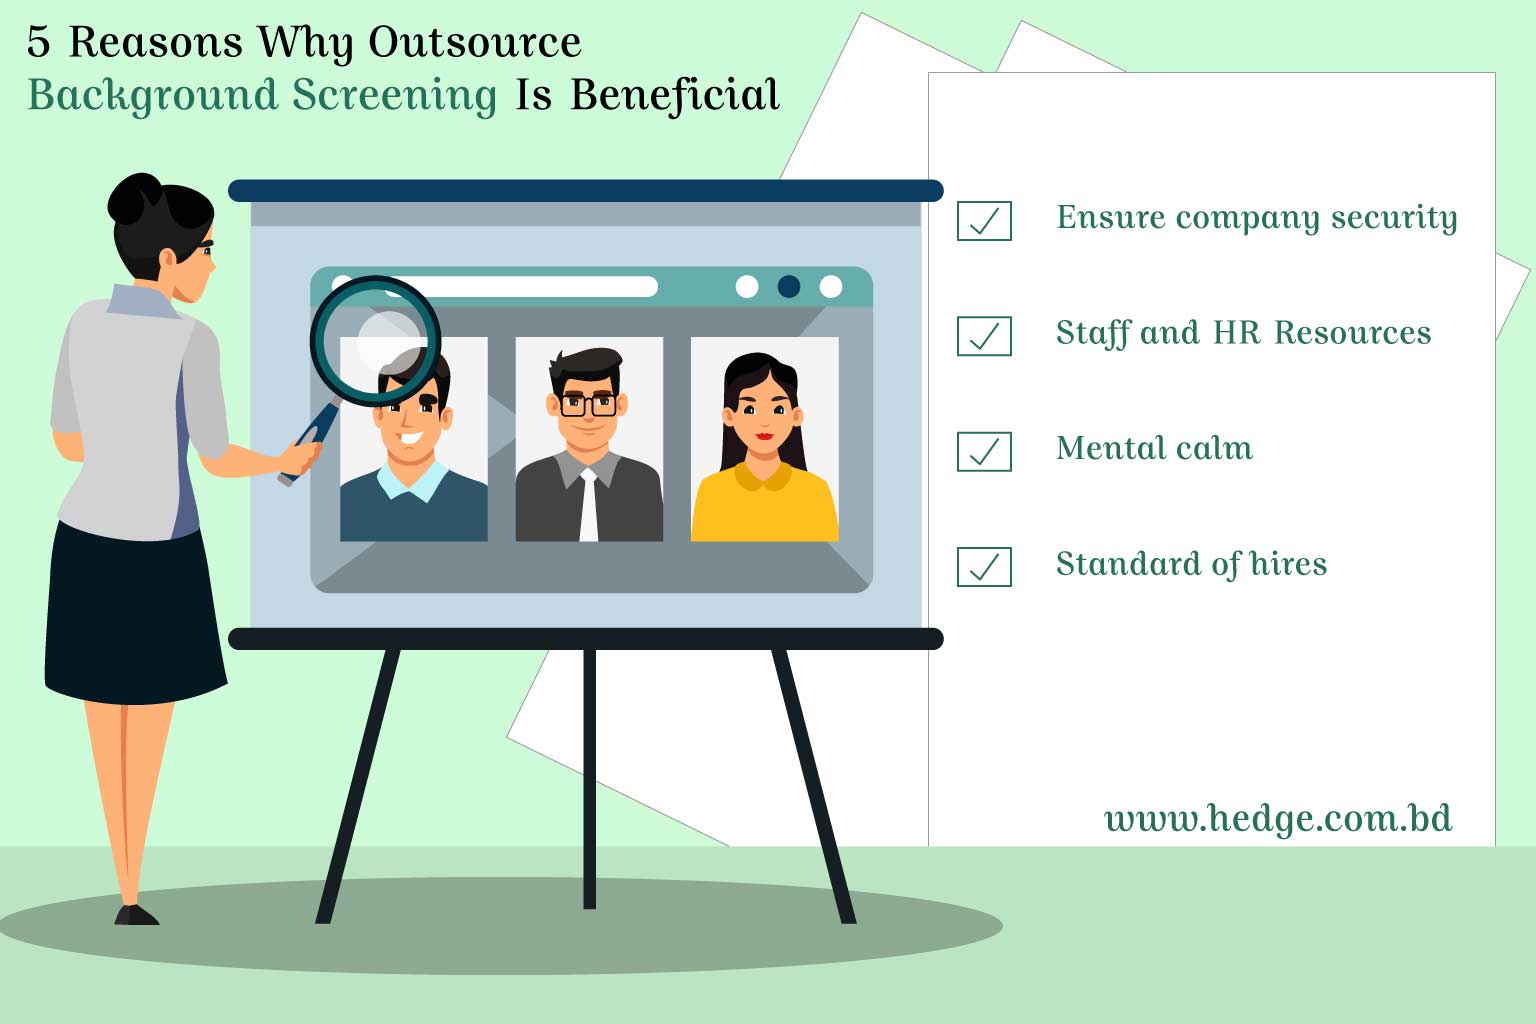 5 Reasons Why Outsource Background Screening